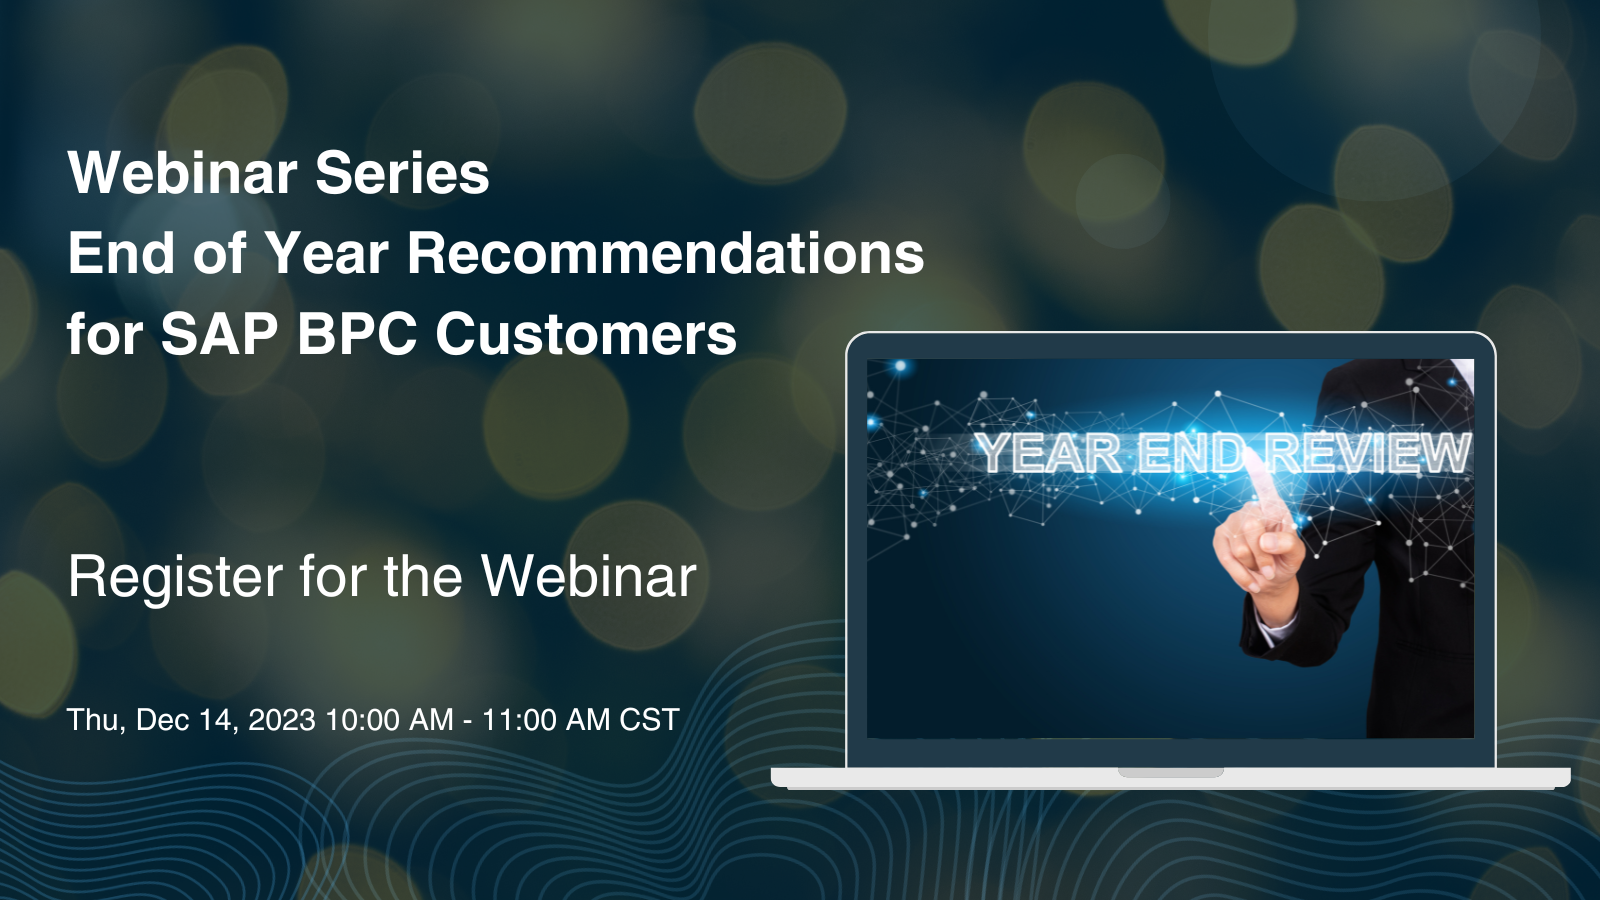 End of Year Recommendations for SAP BPC Customers